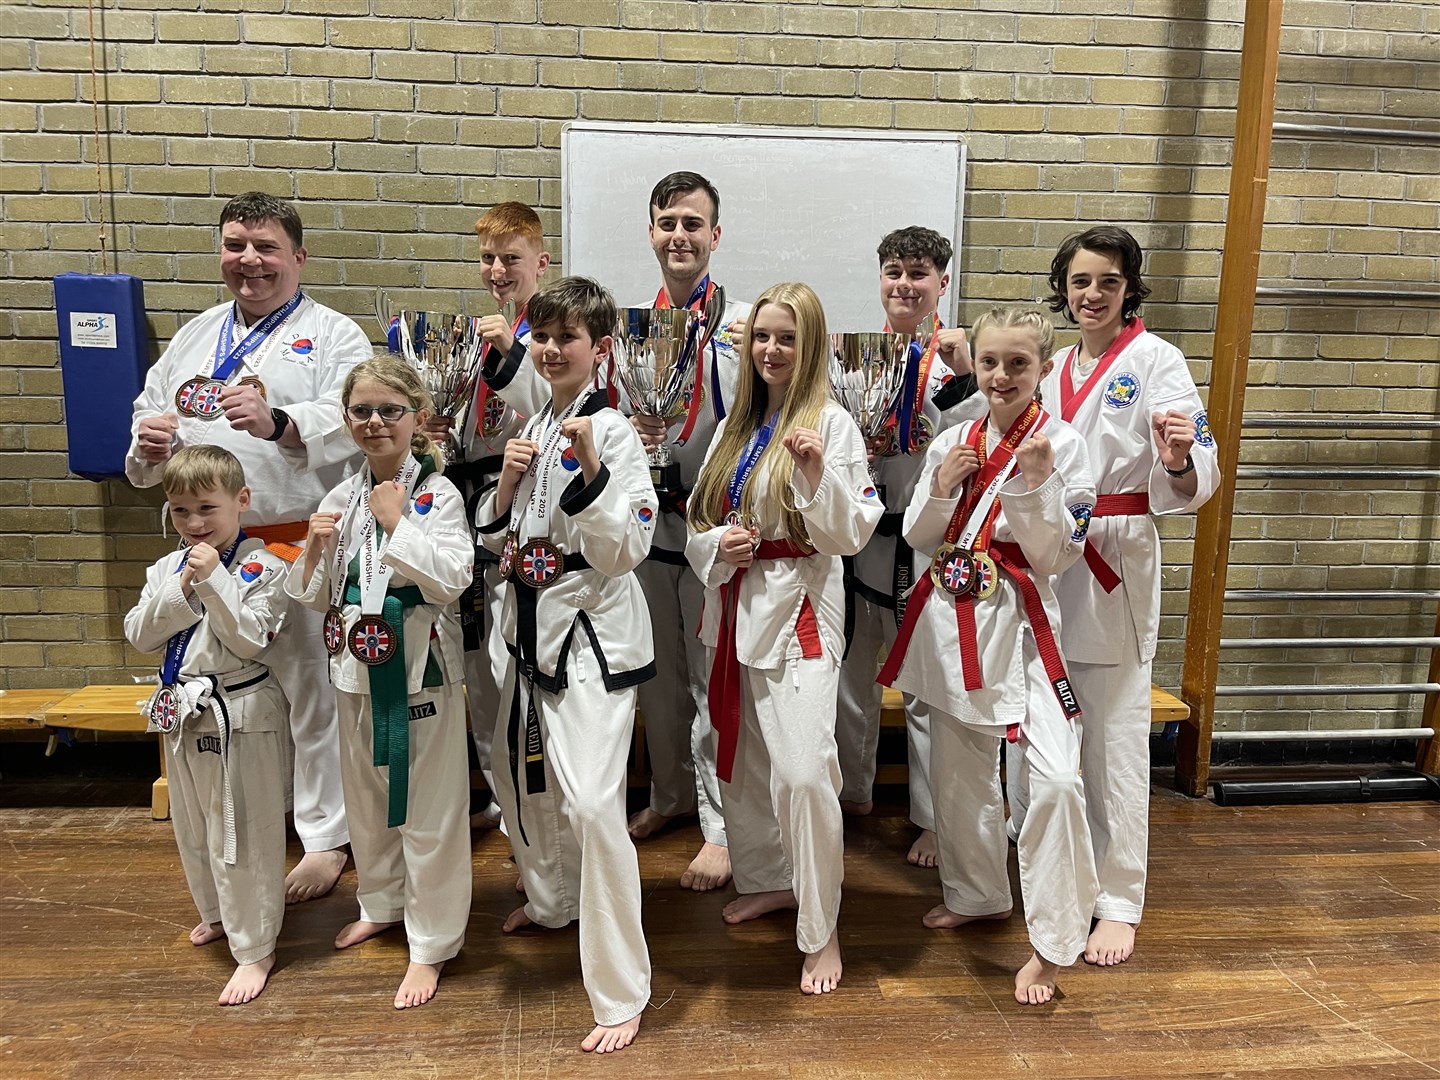 A team shot of the medal winners for DKMA Tang Soo Do.